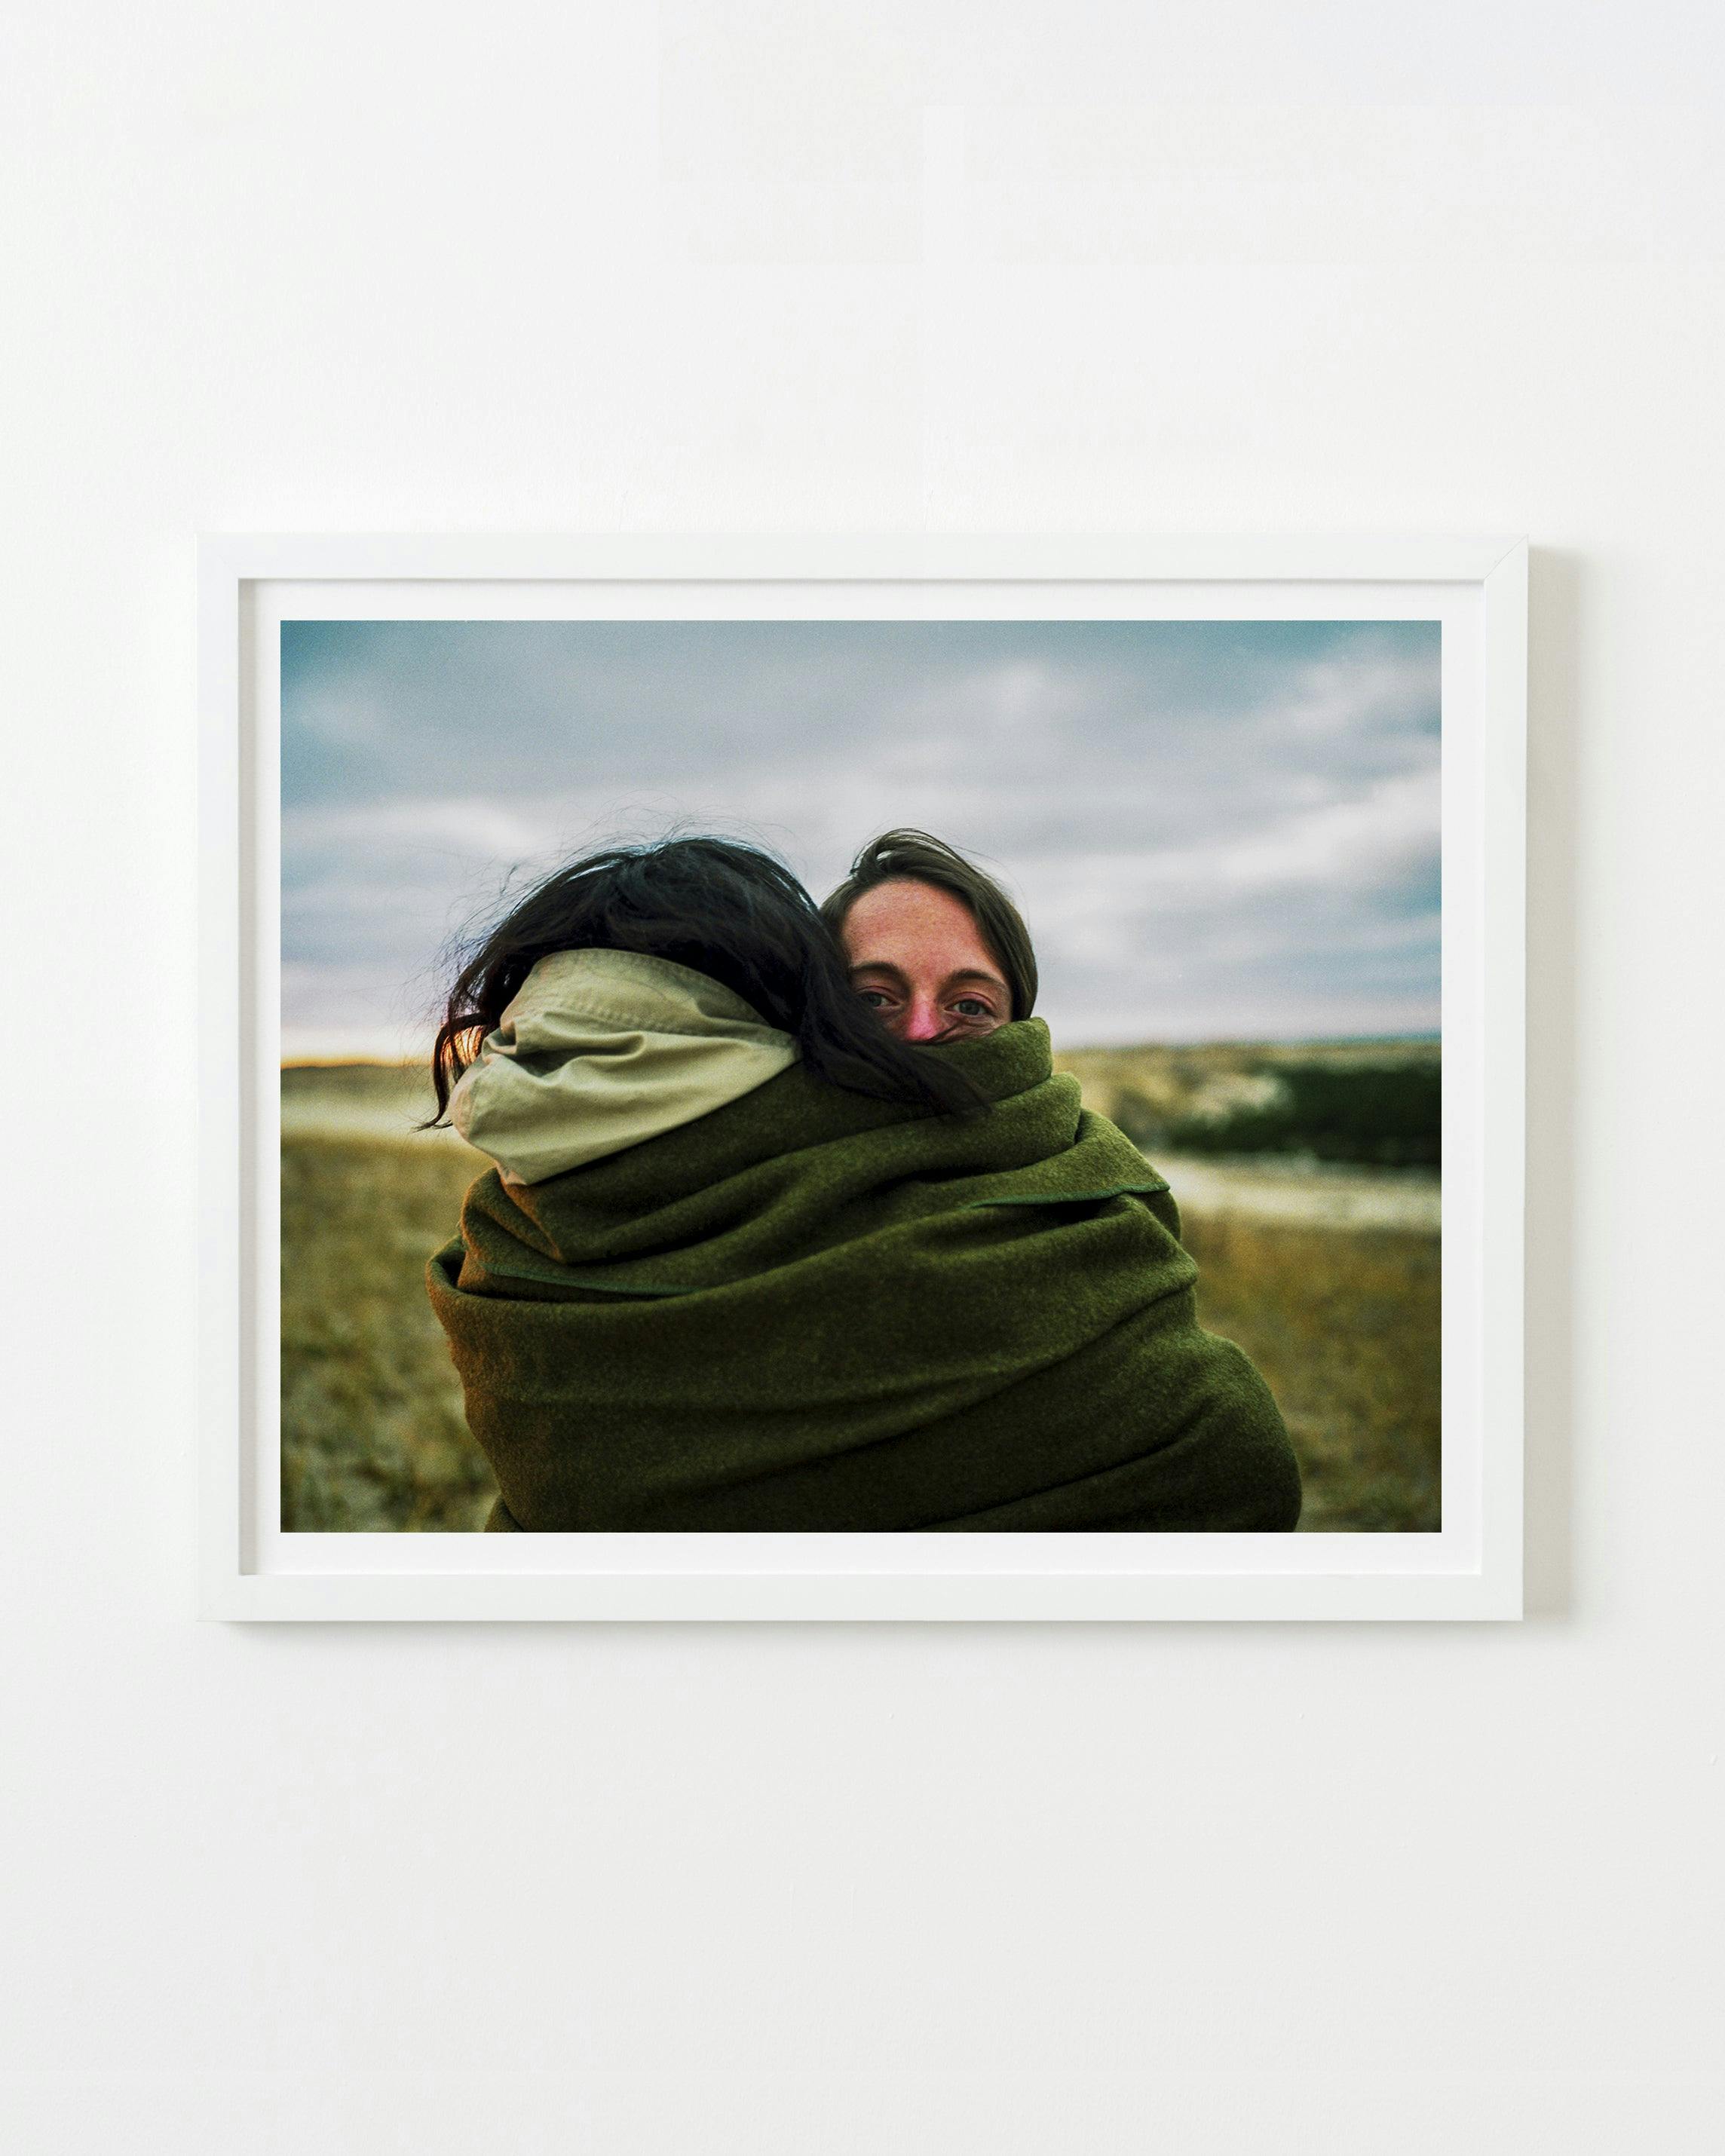 Photography by Nick Meyer titled "Alexis and Lydia Hugging".